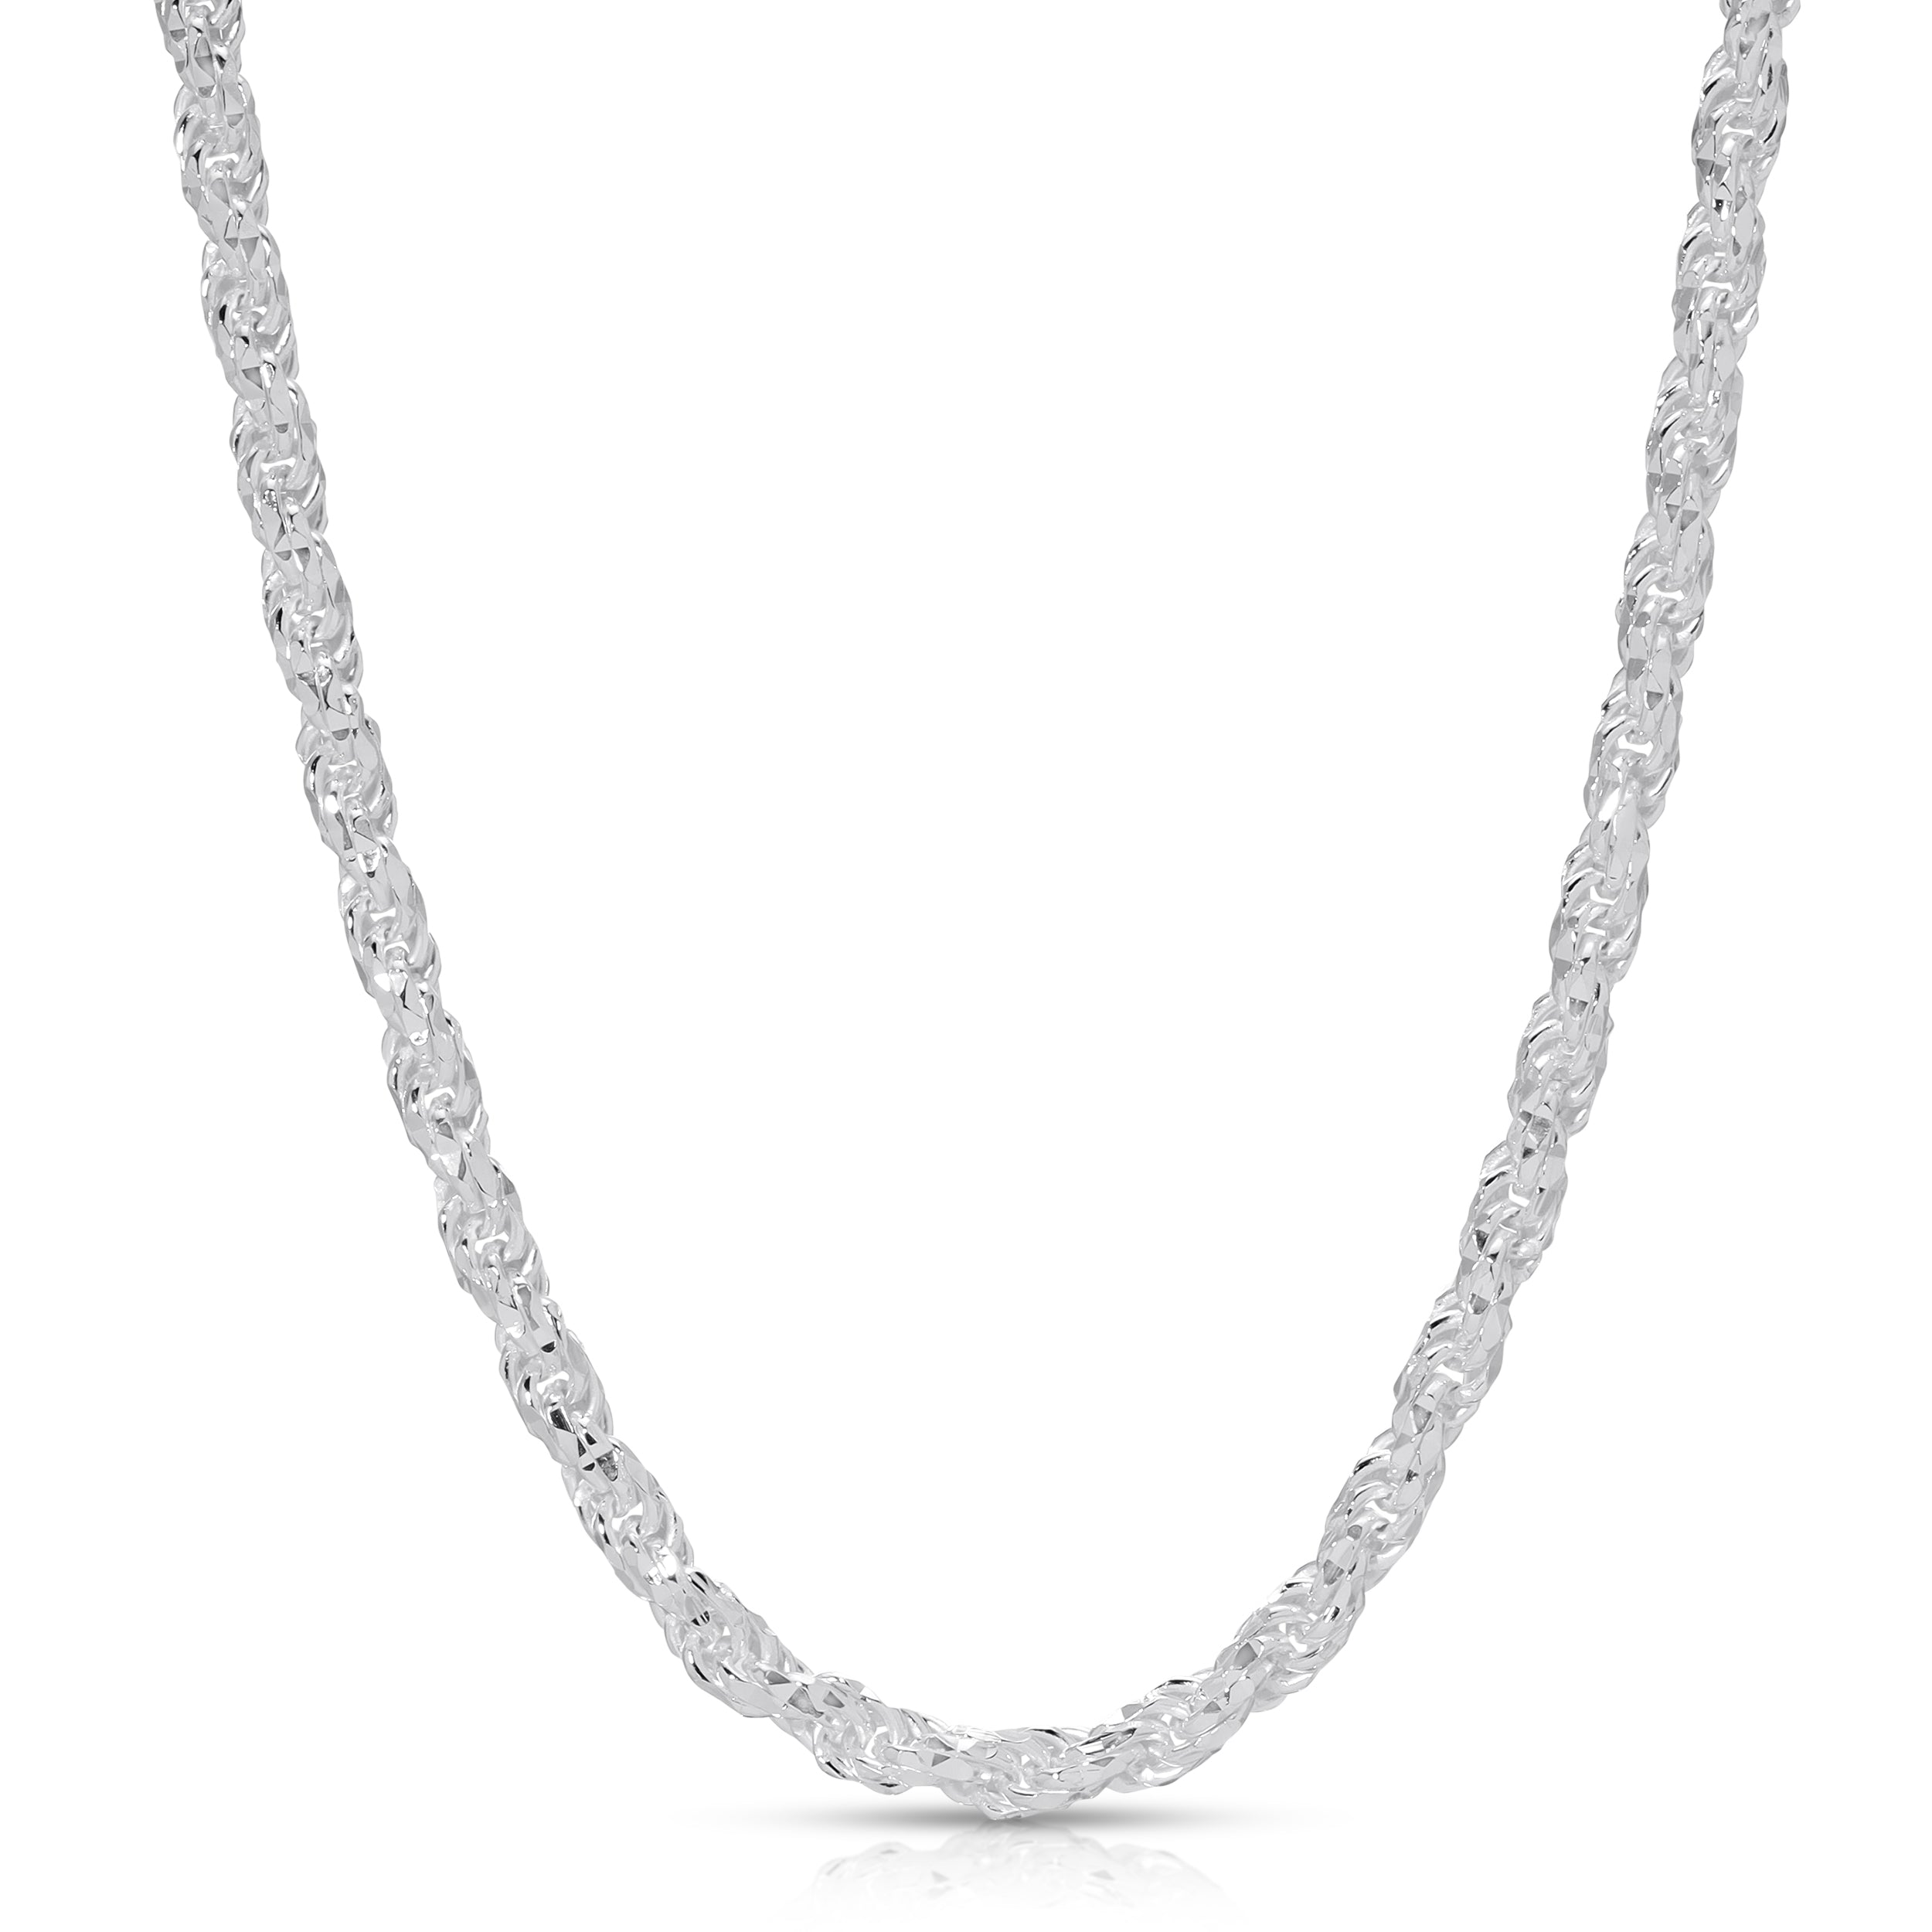 4mm Prism Cut Rope Chain sterling silver